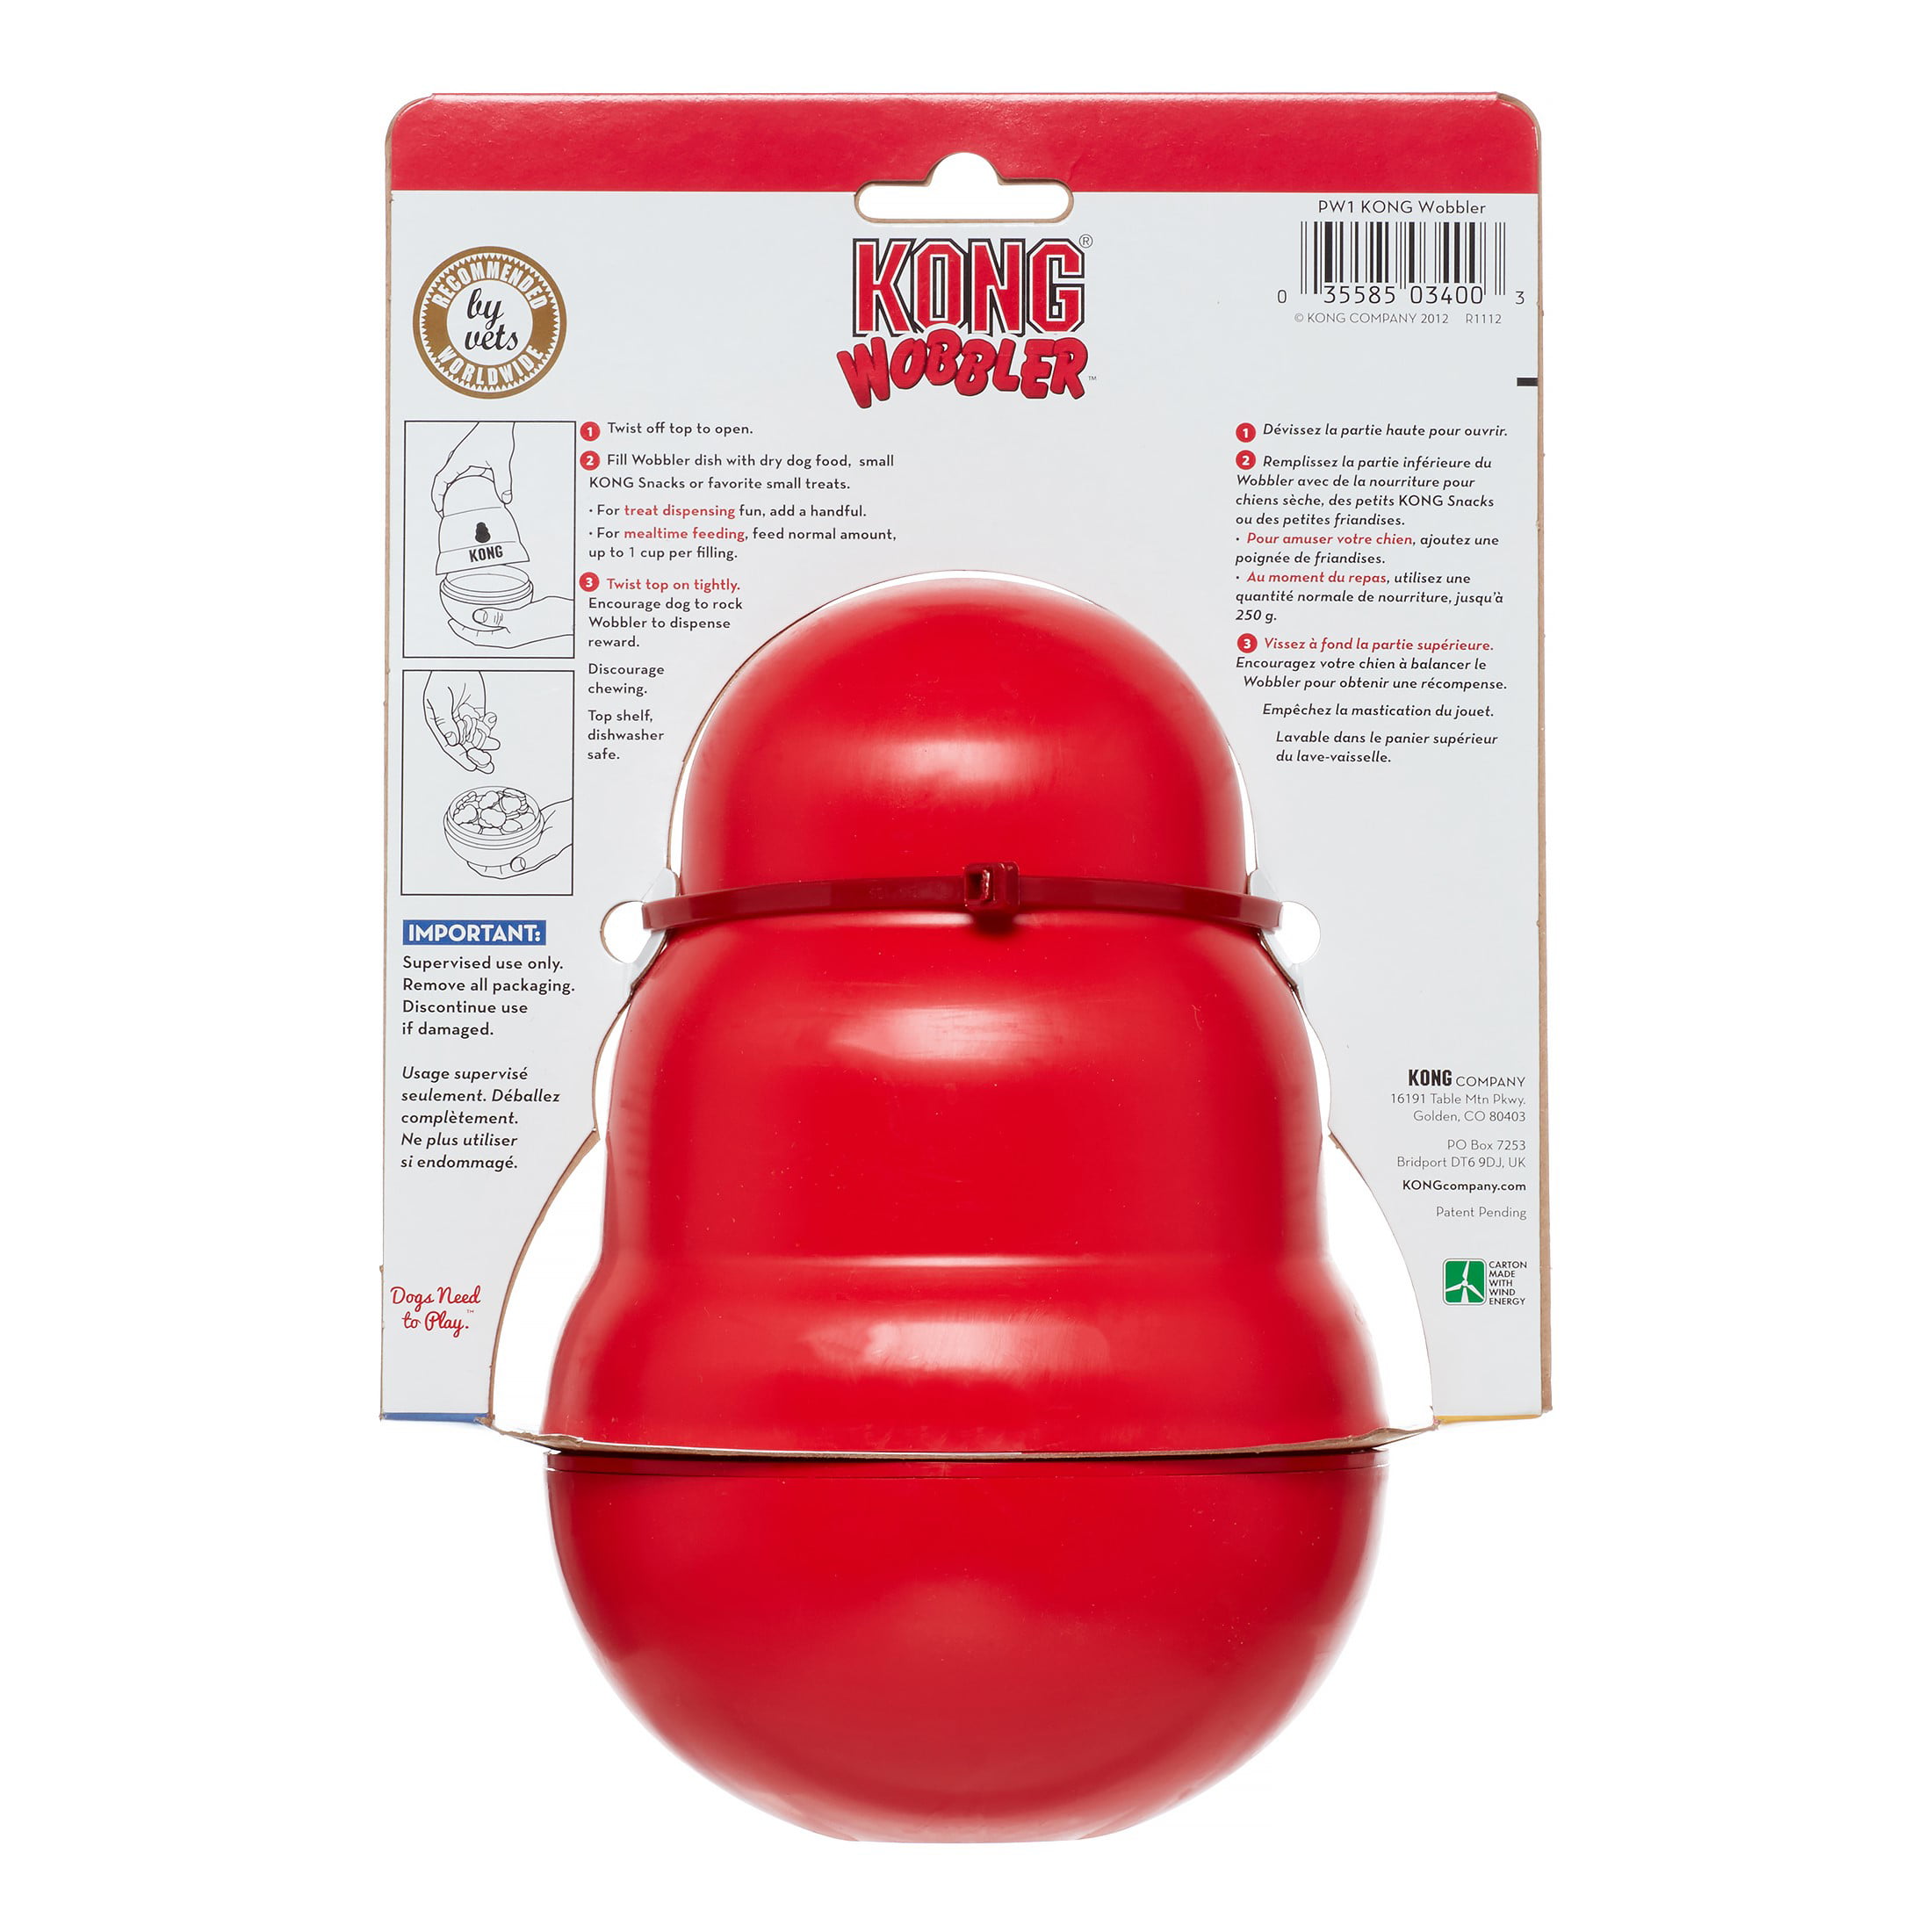 Kong wobbler treat dispensing dog toy It's awesome toy to keep